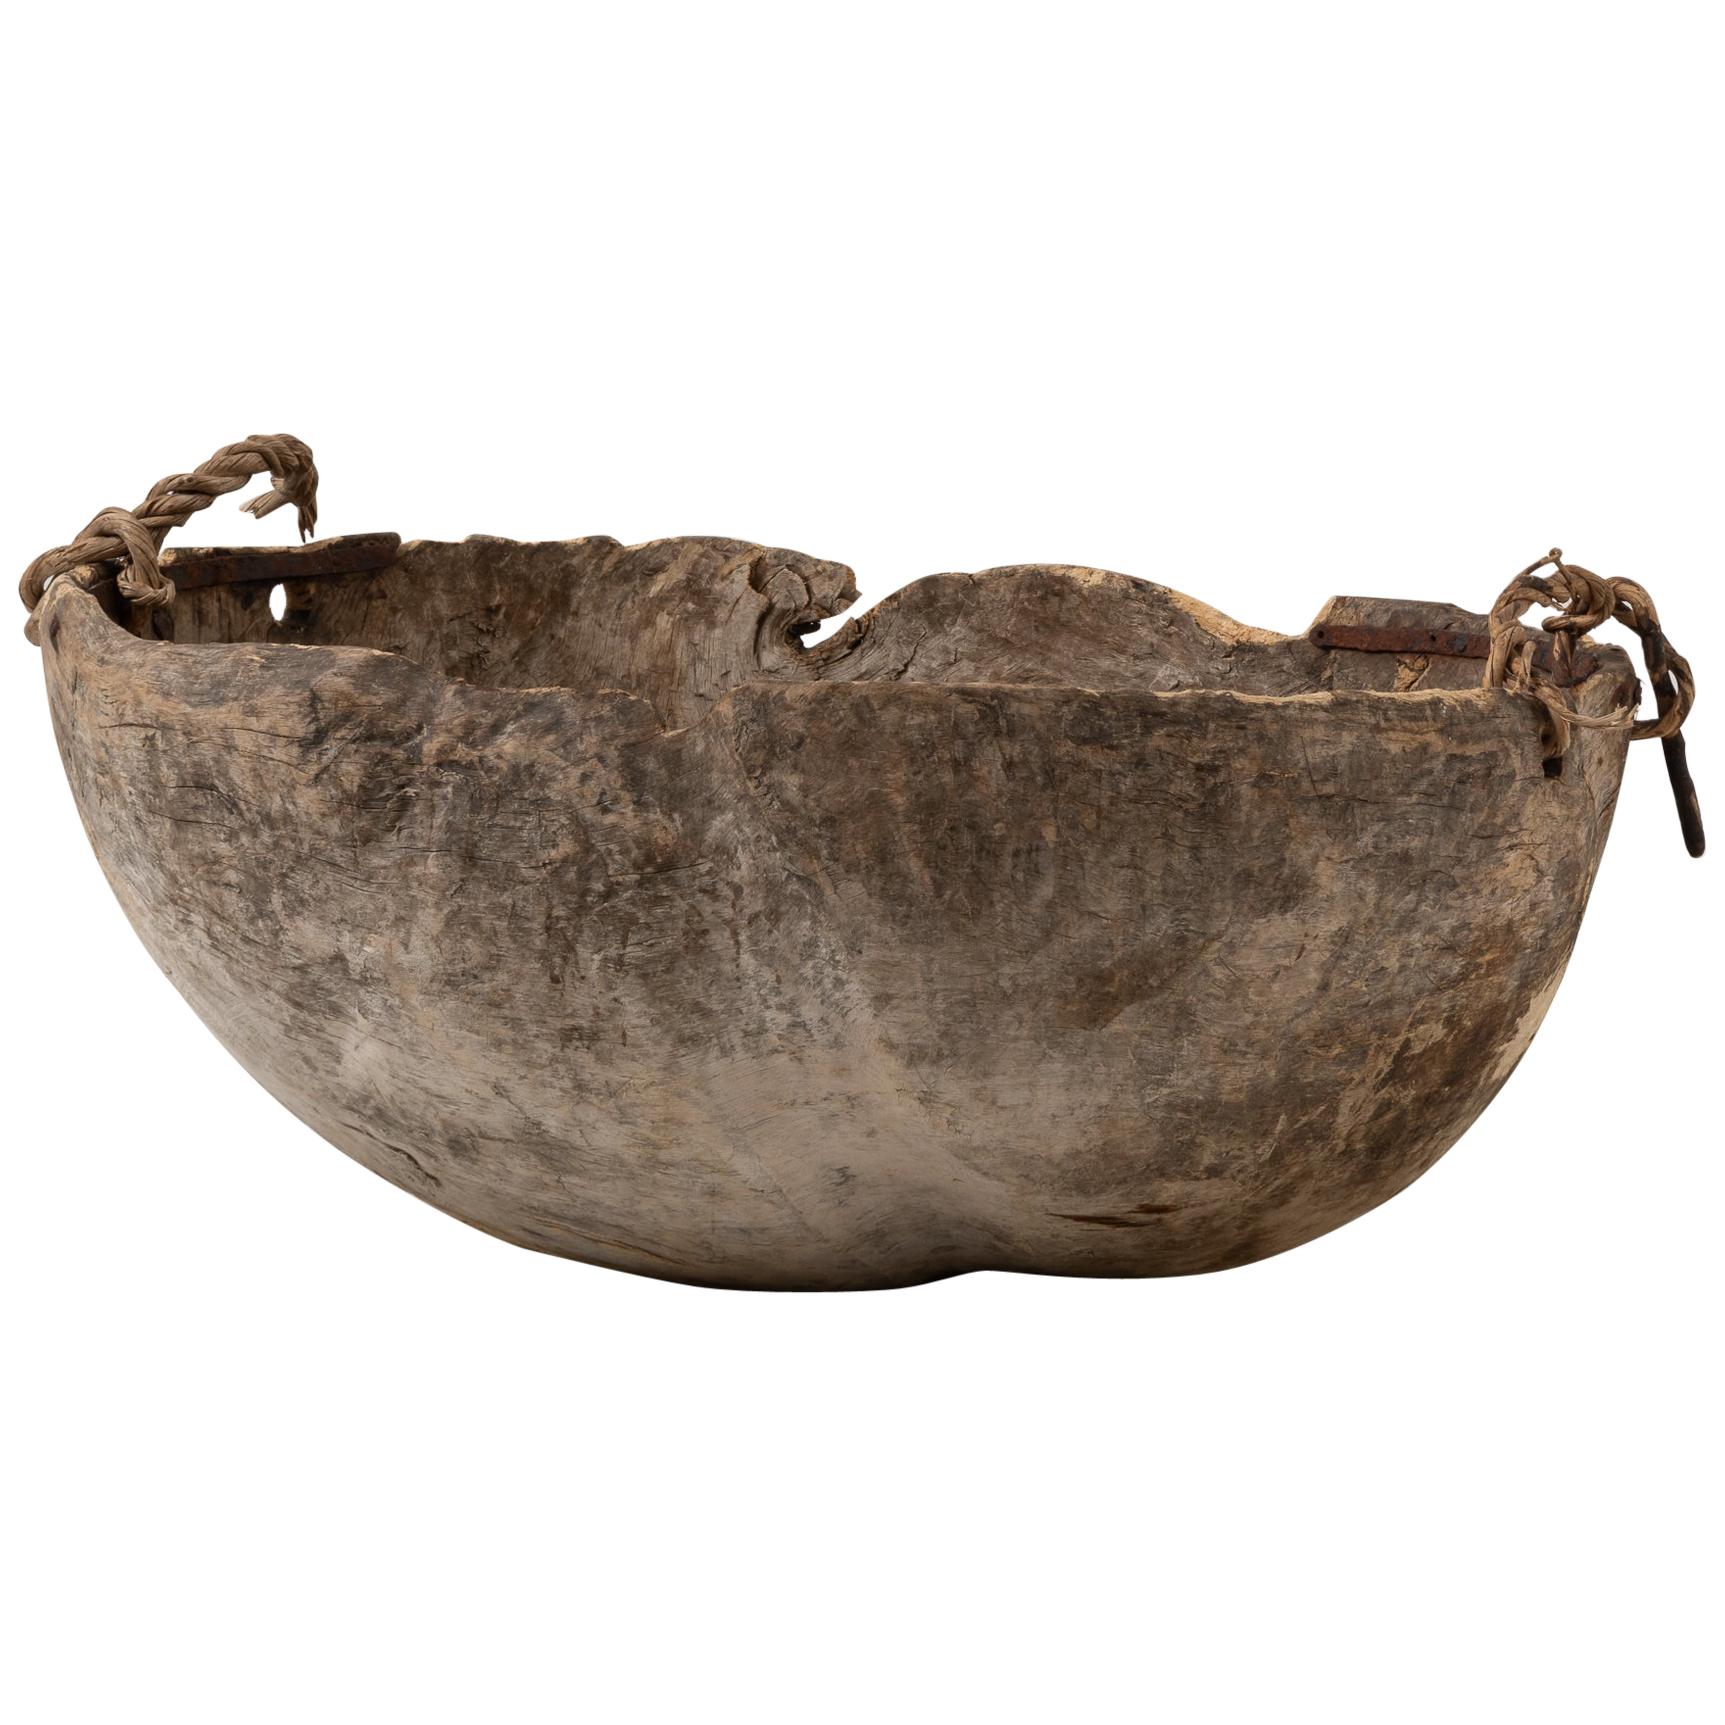 Early 18th Century Swedish Large Primitive Root Bowl